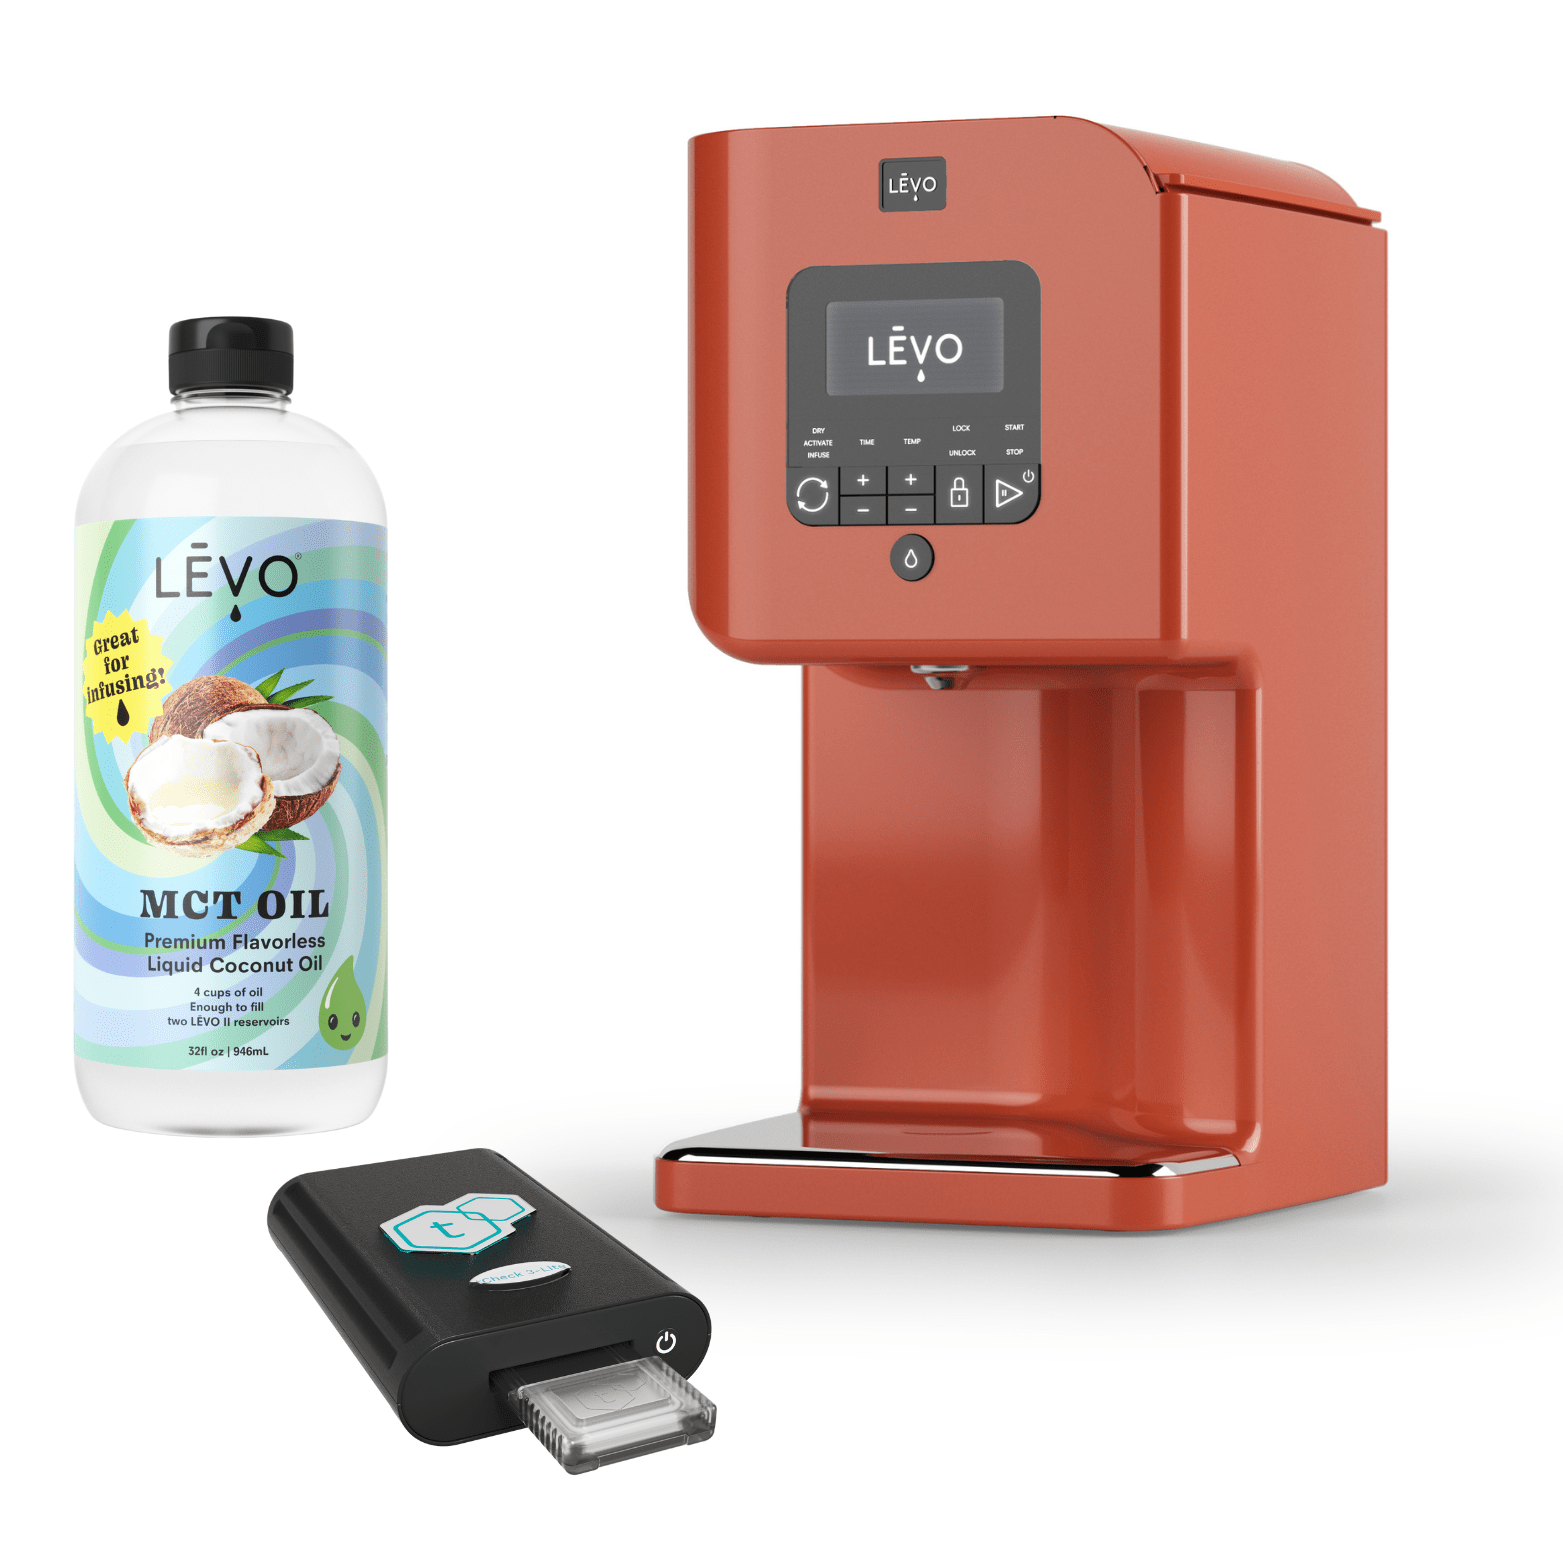 LEVO II oil infuser with tCheck 3 potency testing device and LEVO MCT Oil. LĒVO C x tCheck Potency Tester Bundle: Infuse and test with precision.